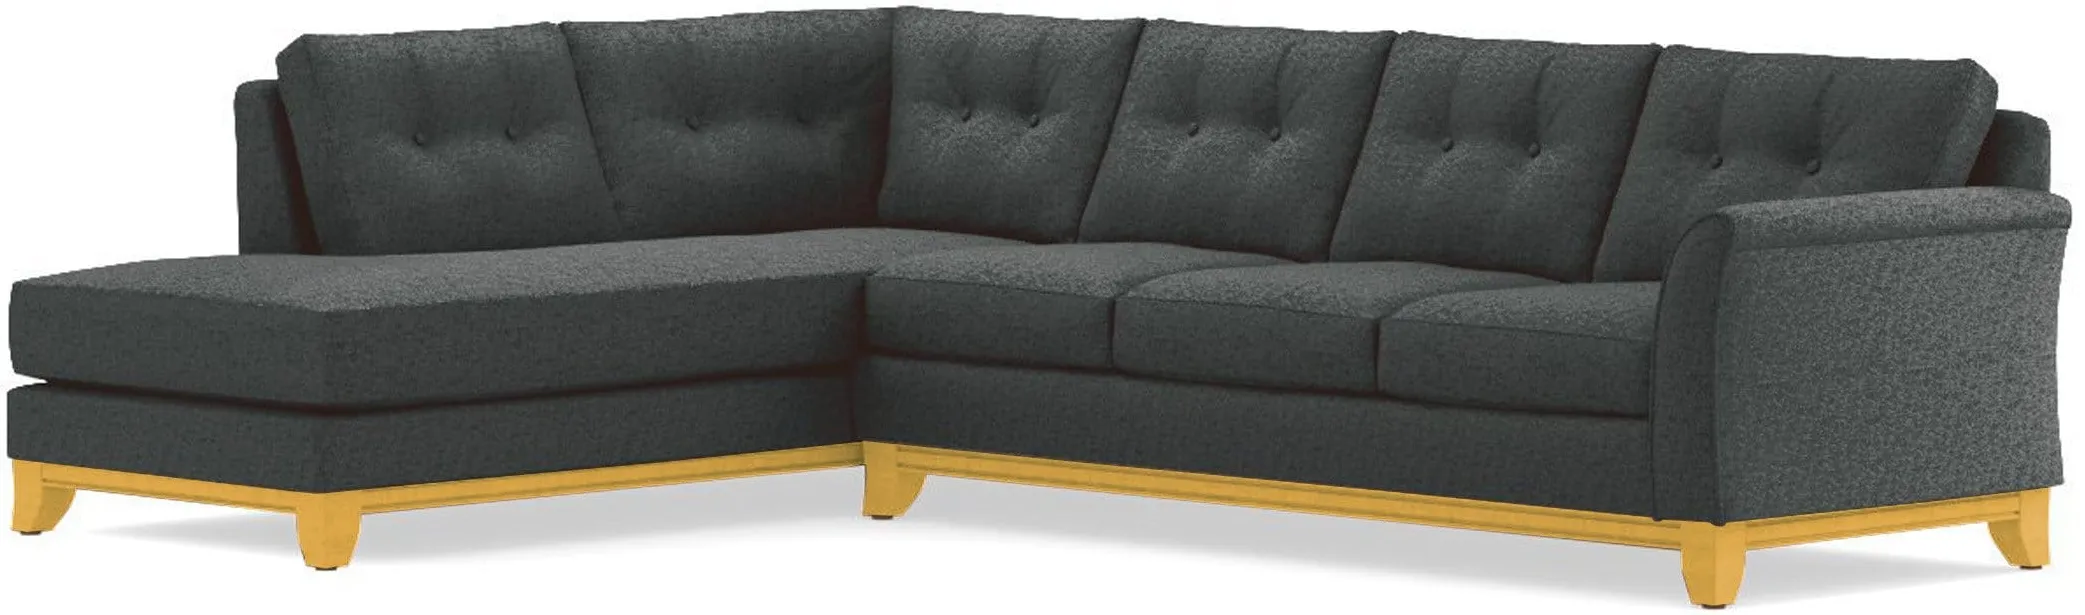 Marco 2pc Sectional Sofa